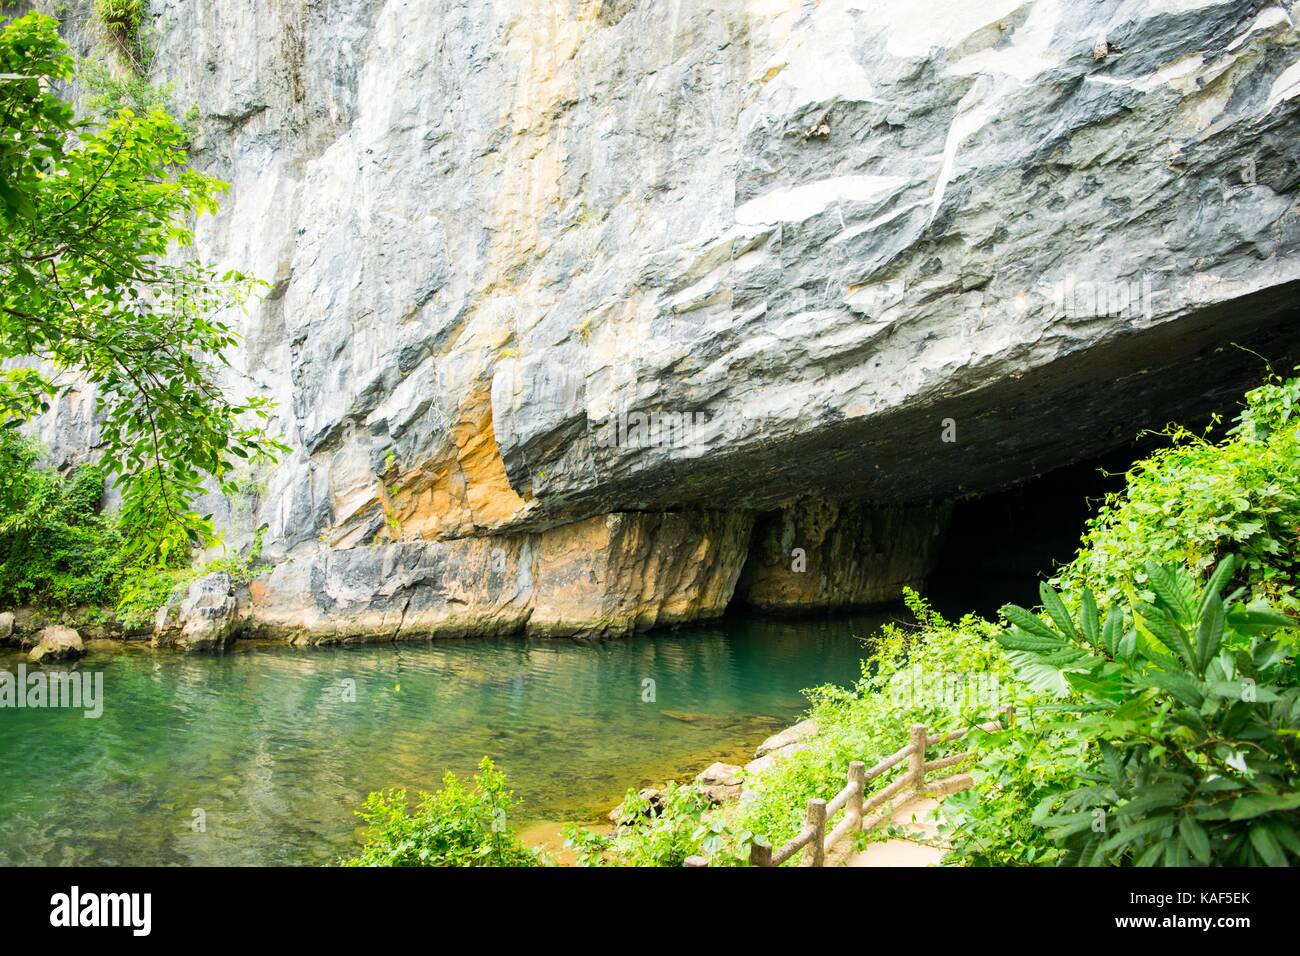 Entrance to Phong Nha Ke Bang Underground River, Caves, Limestone and Karsts Formations (UNESCO World Heritage Site) - Quang Binh, Vietnam Stock Photo